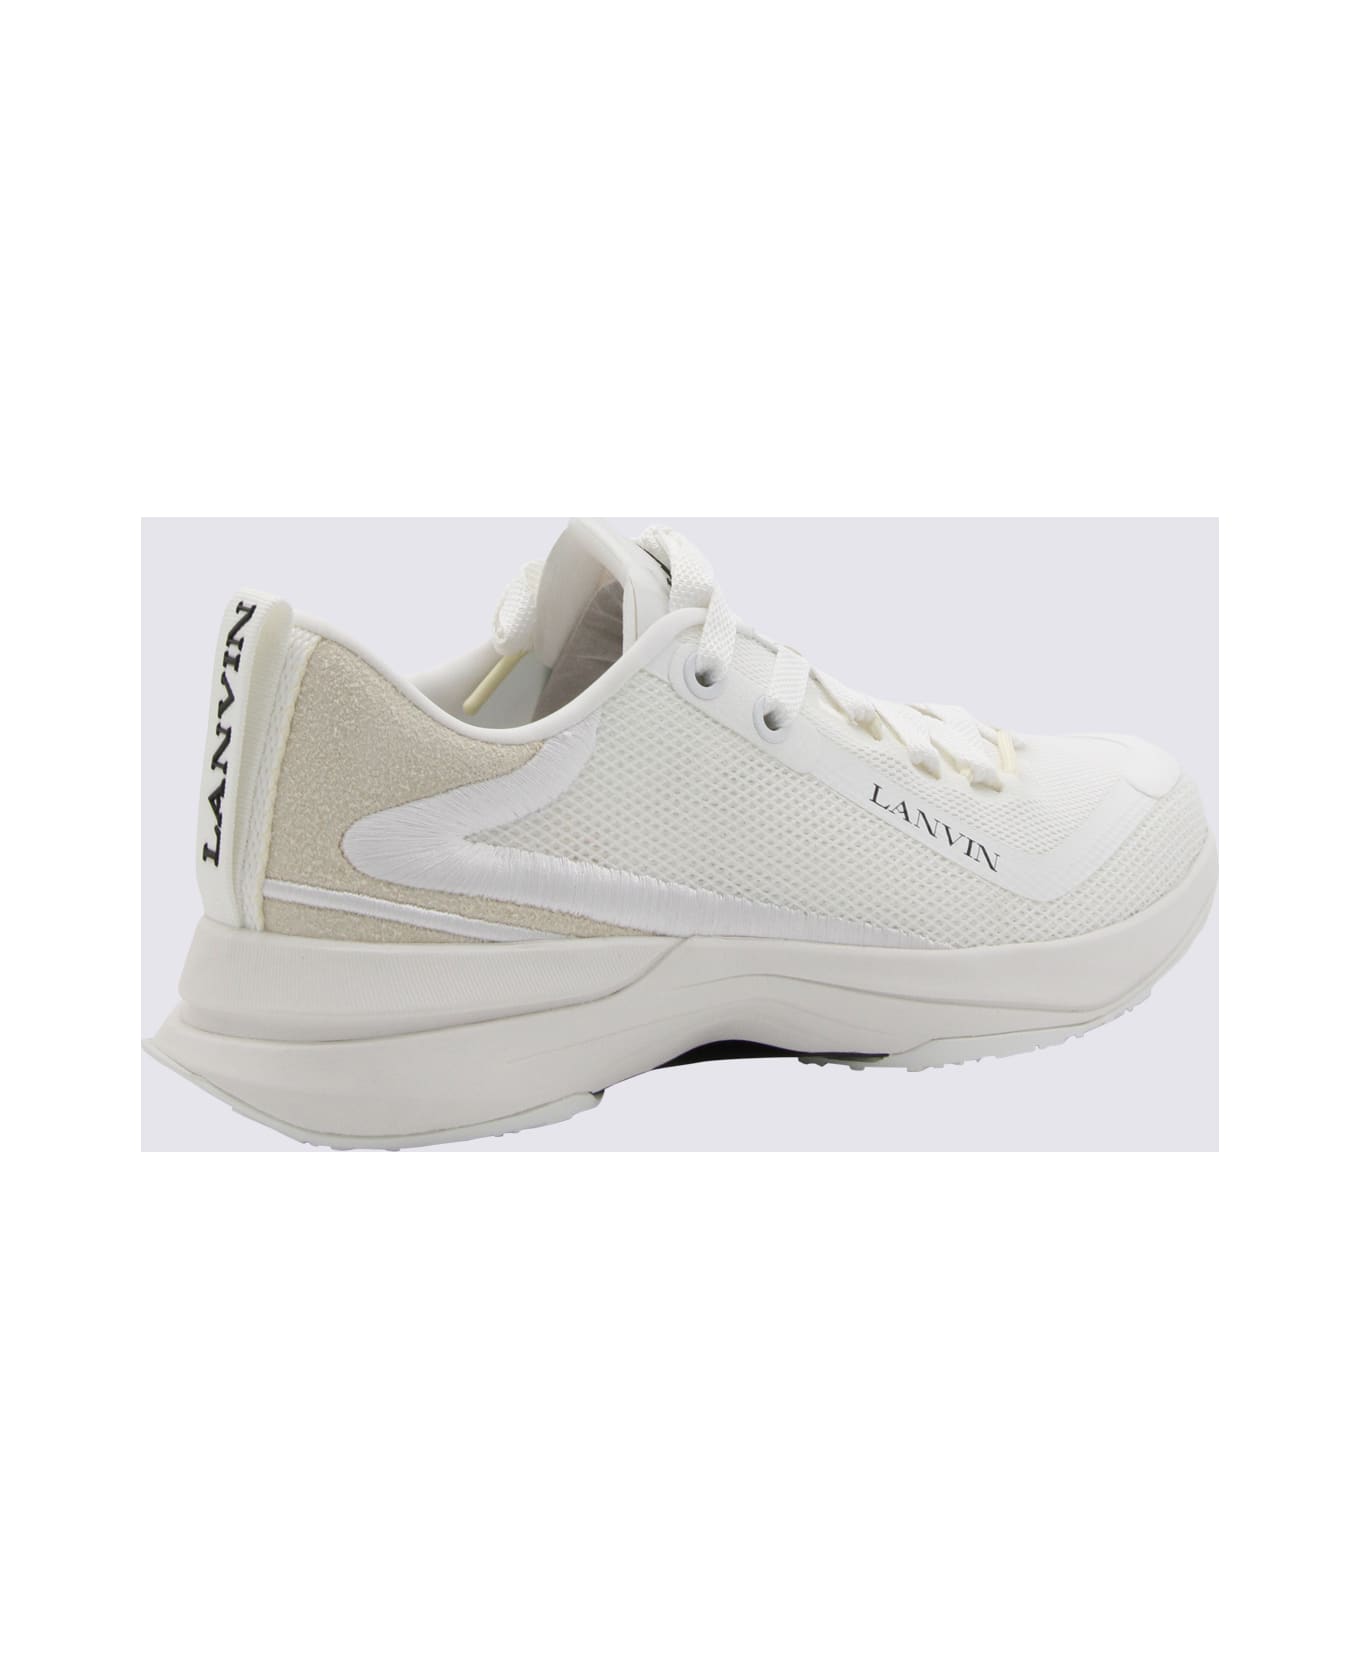 Lanvin White Leather Sneakers - White スニーカー